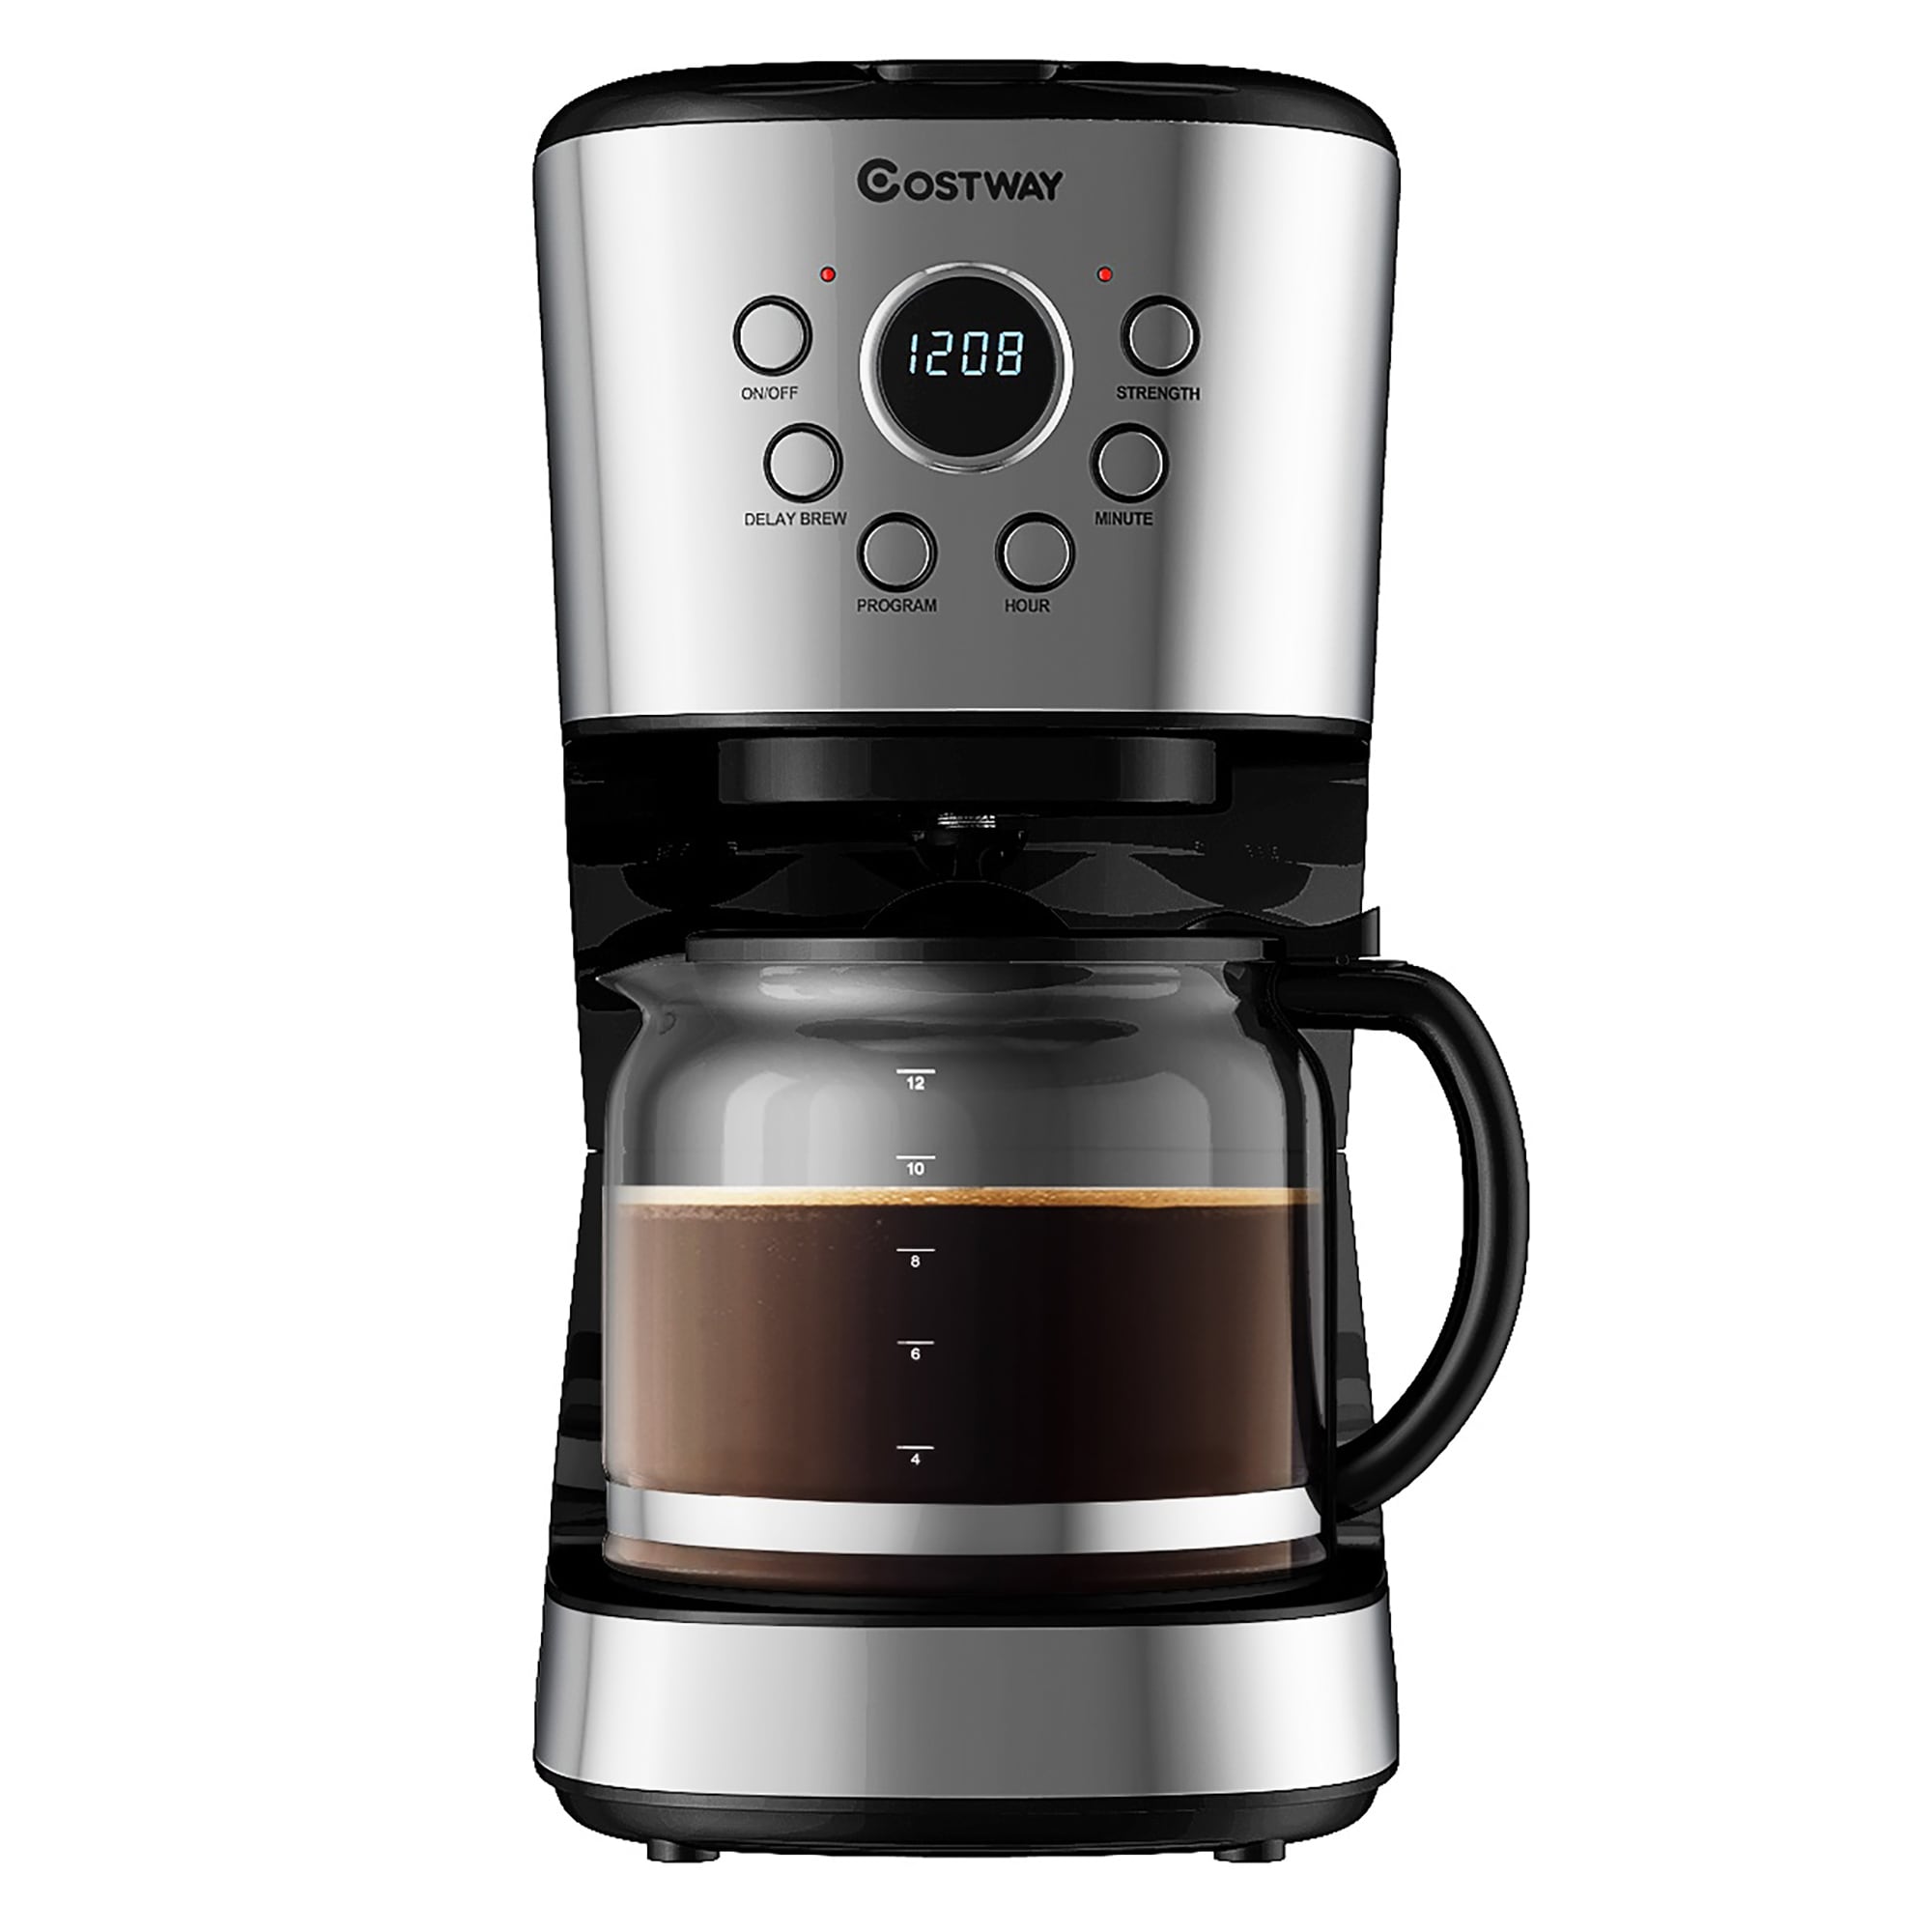 https://ak1.ostkcdn.com/images/products/is/images/direct/5365c15db70fa5be5ea4ec27805430b323bf31bf/Costway-12-Cup-Programmable-Coffee-Maker-Brew-Machine-LCD-Display-w-.jpg